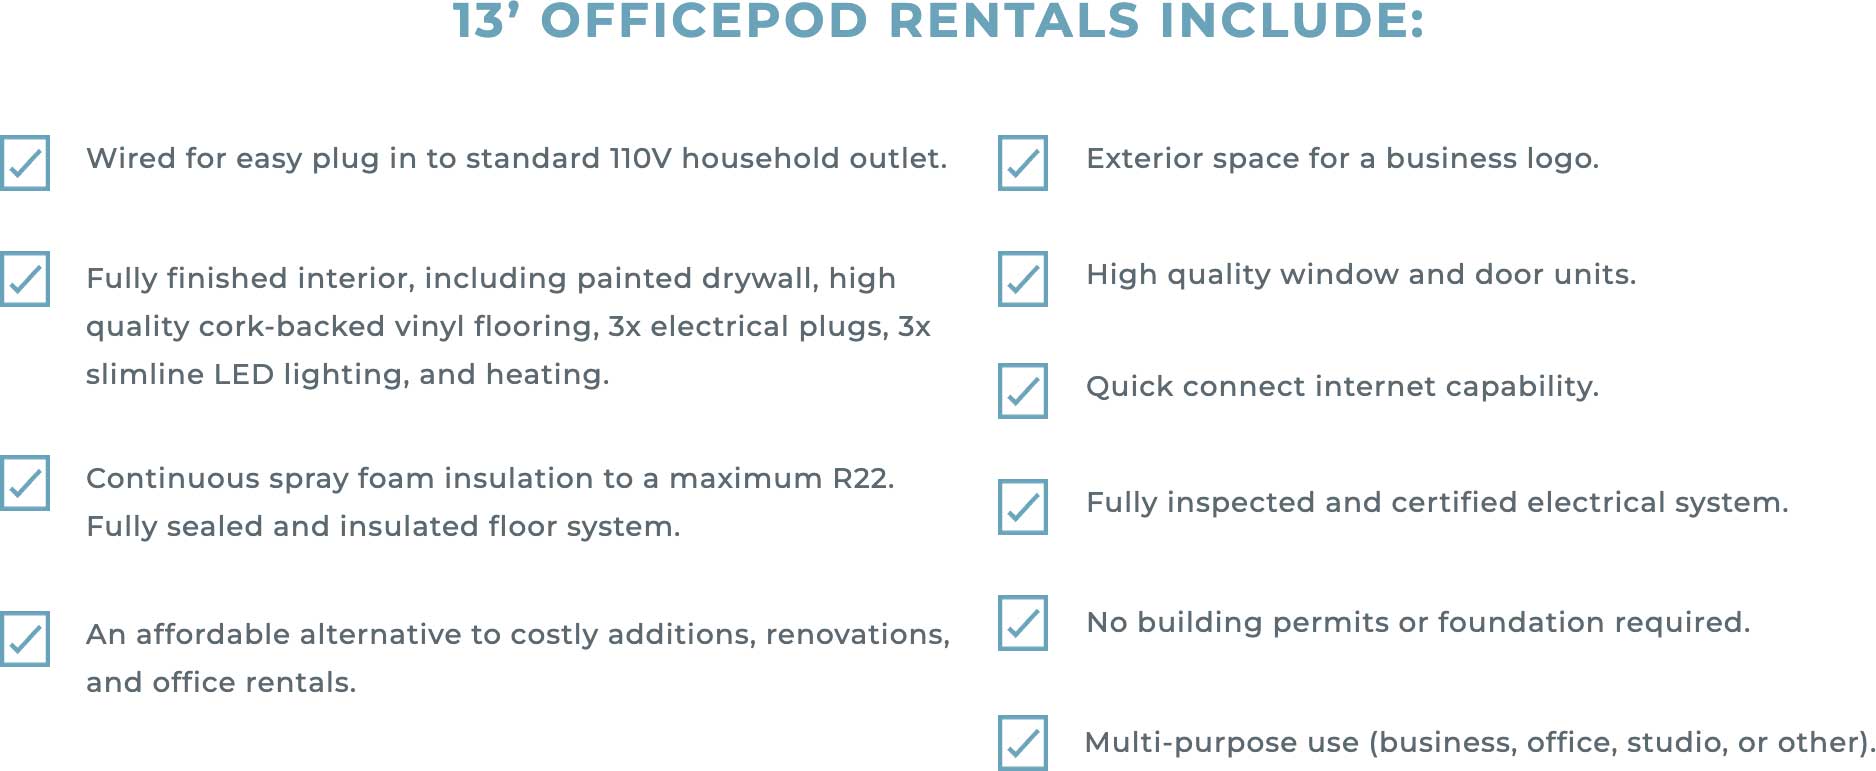 officepod rentals include